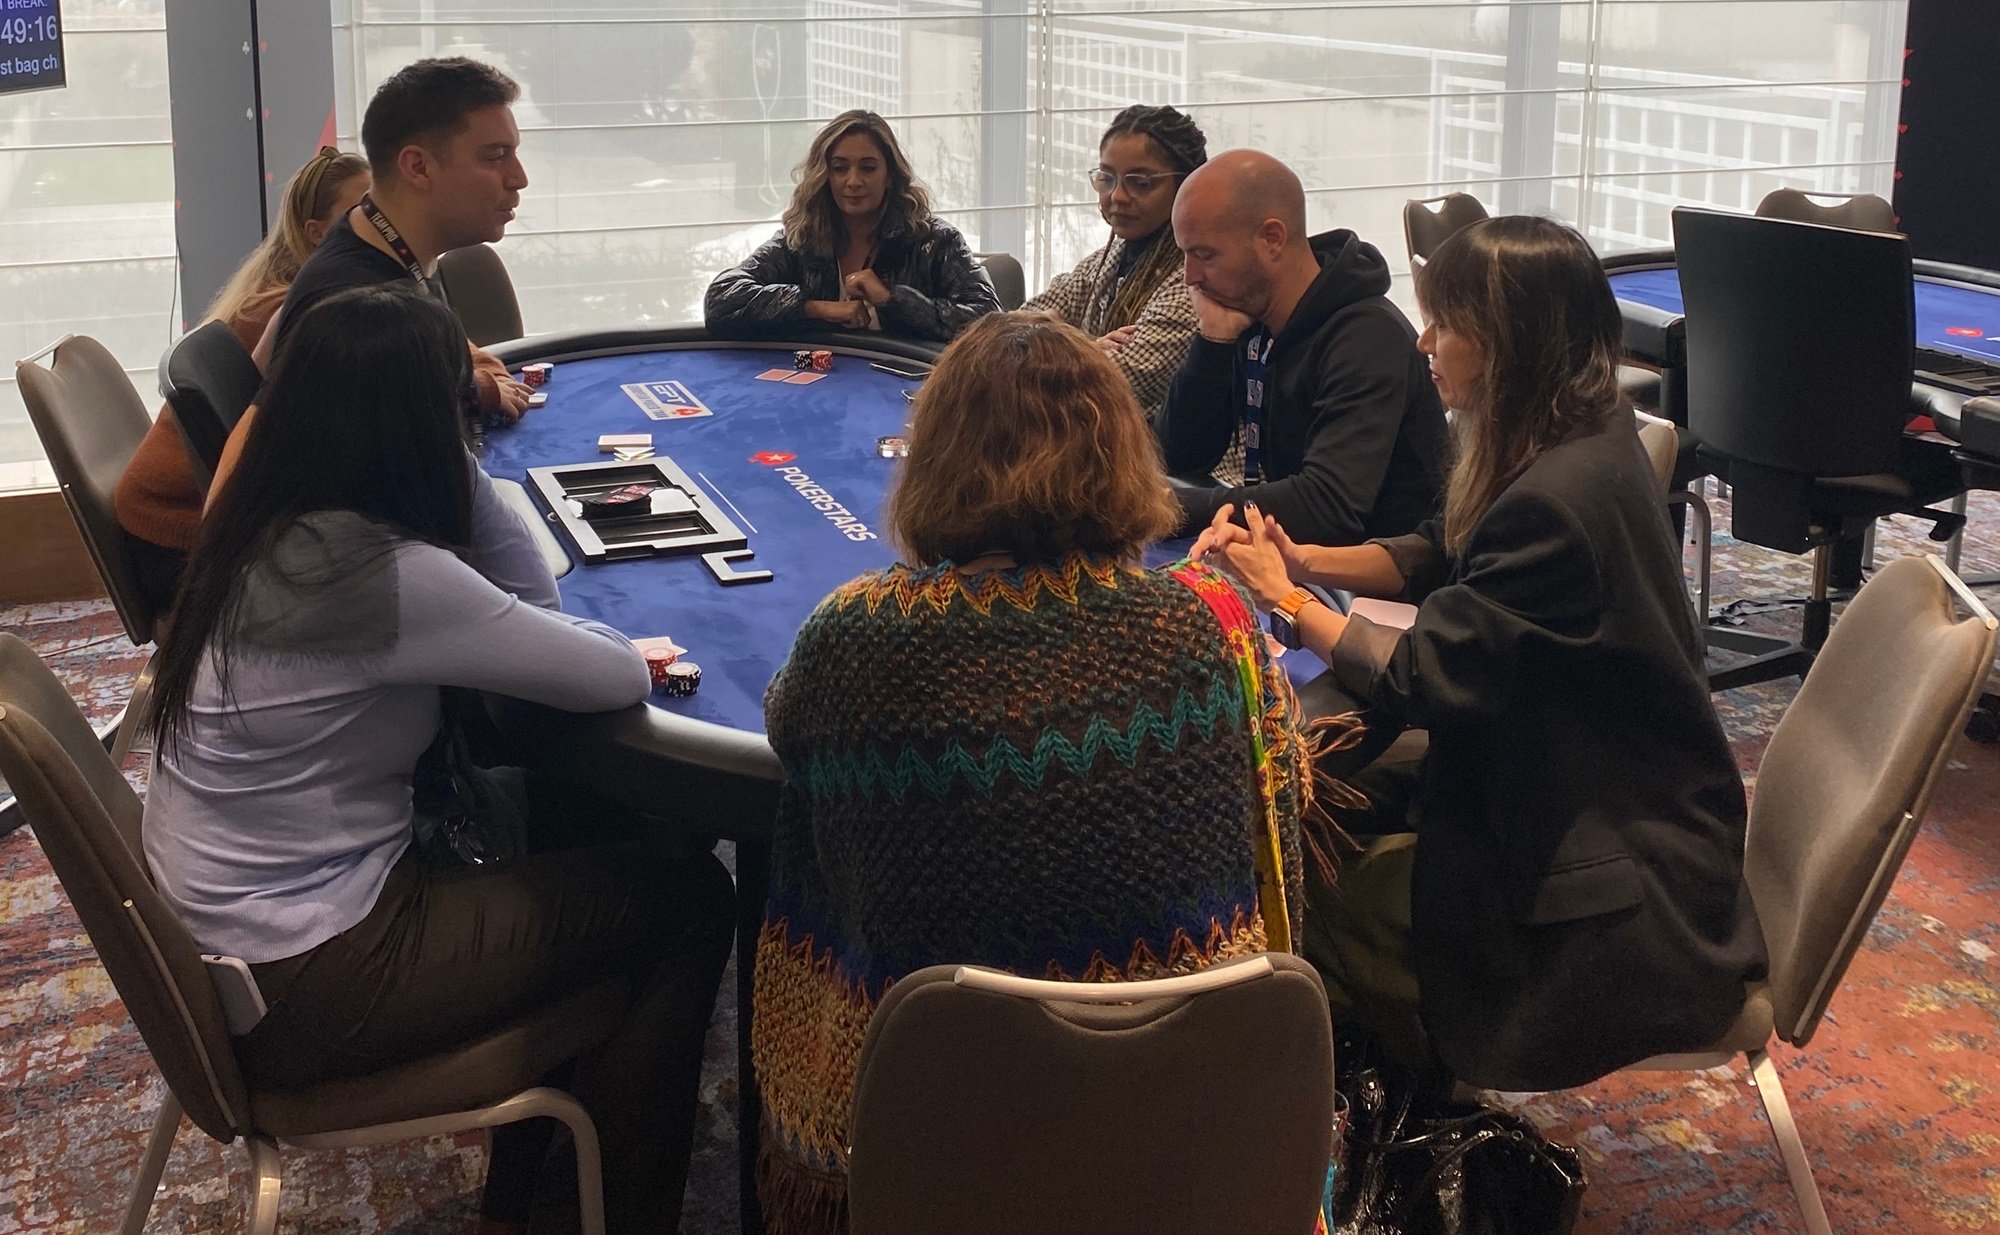 EPT Prague Diary: Teaching the World Poker One EPT at a Time